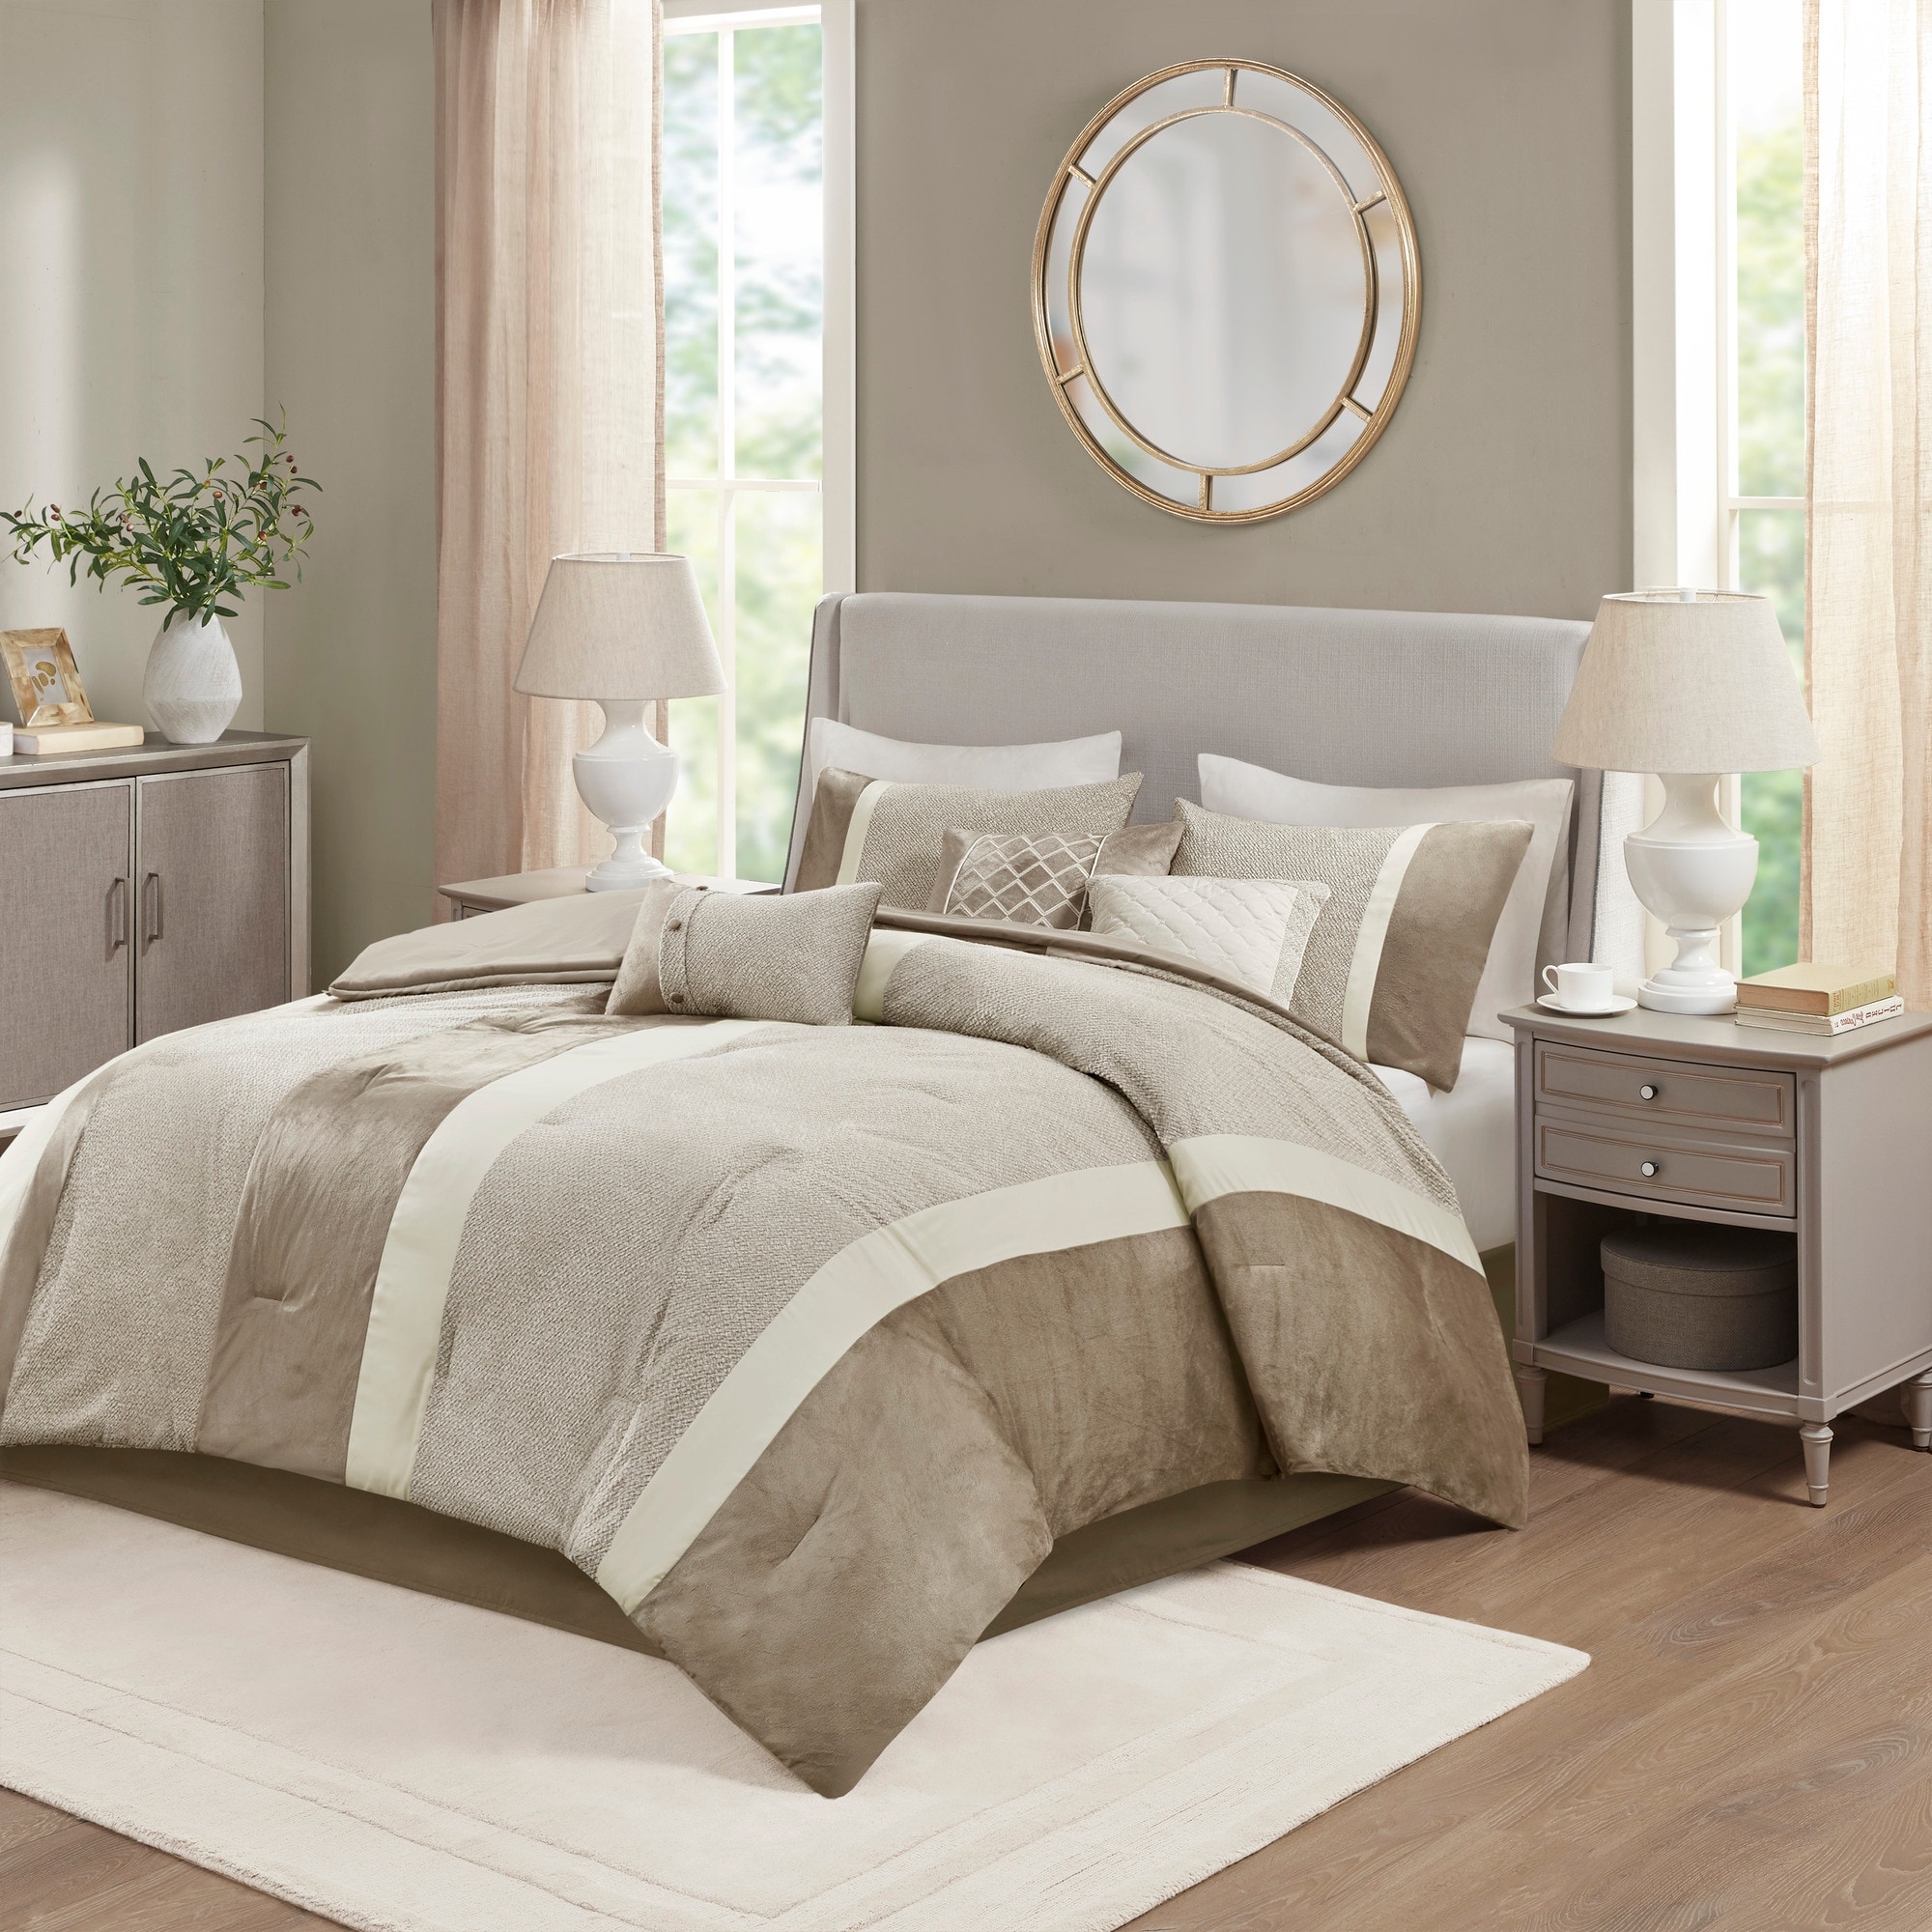 Details about   Madison Park Trinity 7 Piece Comforter Set-Taupe-King 